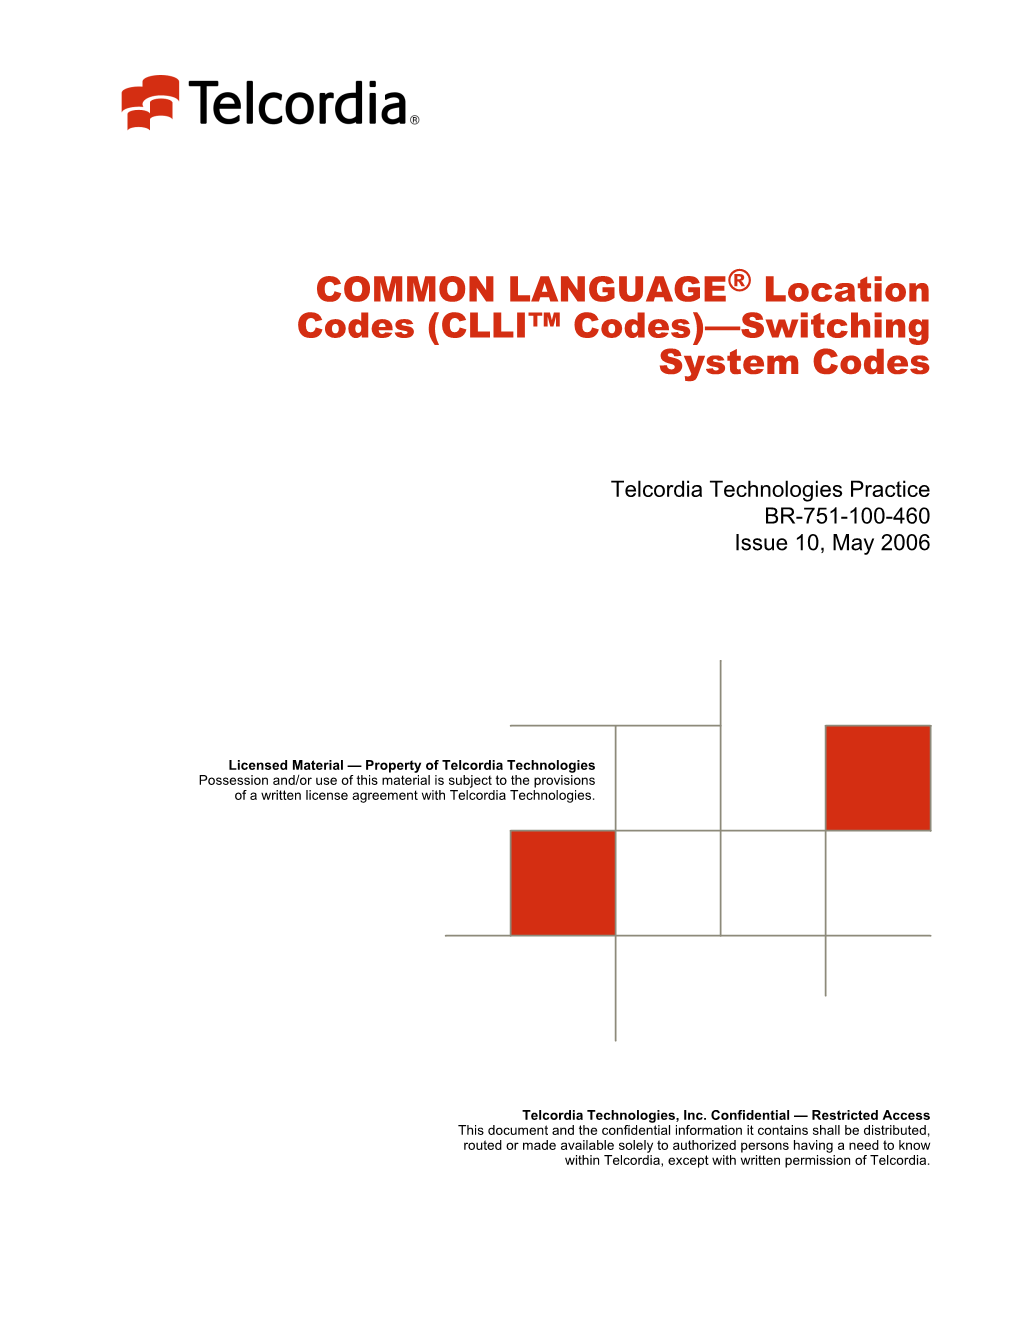 (CLLI™ Codes)—Switching System Codes